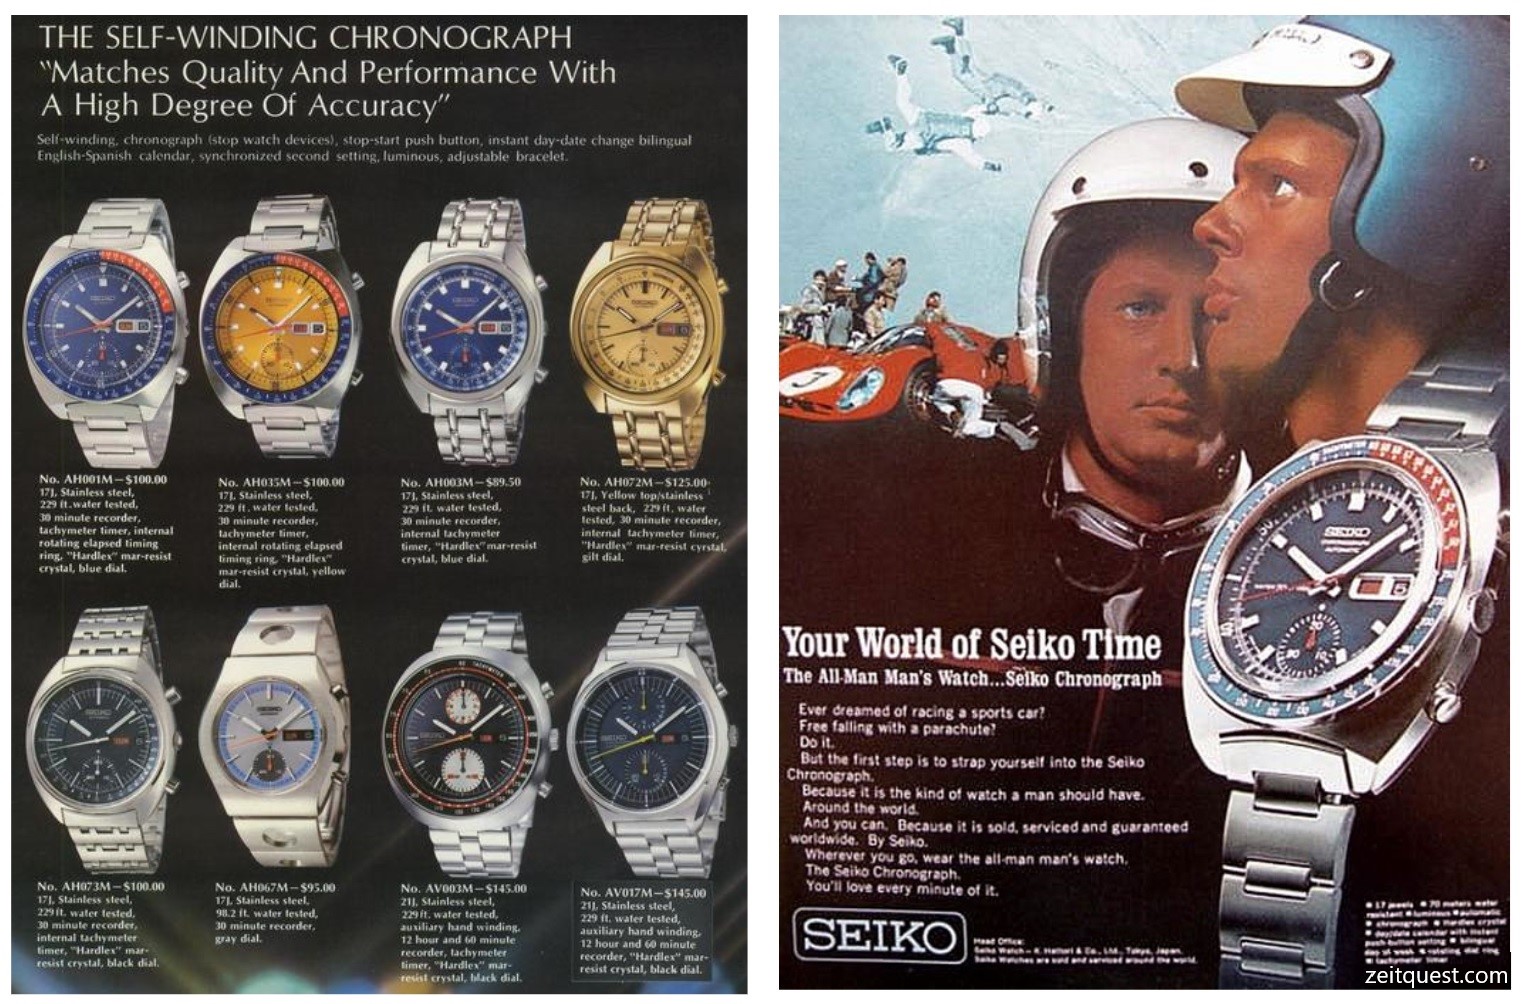 Left: Seiko 1969 Catalog, showing different Seiko 6139-600X models. Right: Seiko Chronograph advertisement by Seiko for the 6139 model (1969). Credits: Seiko 1969 Catalog, Seiko.